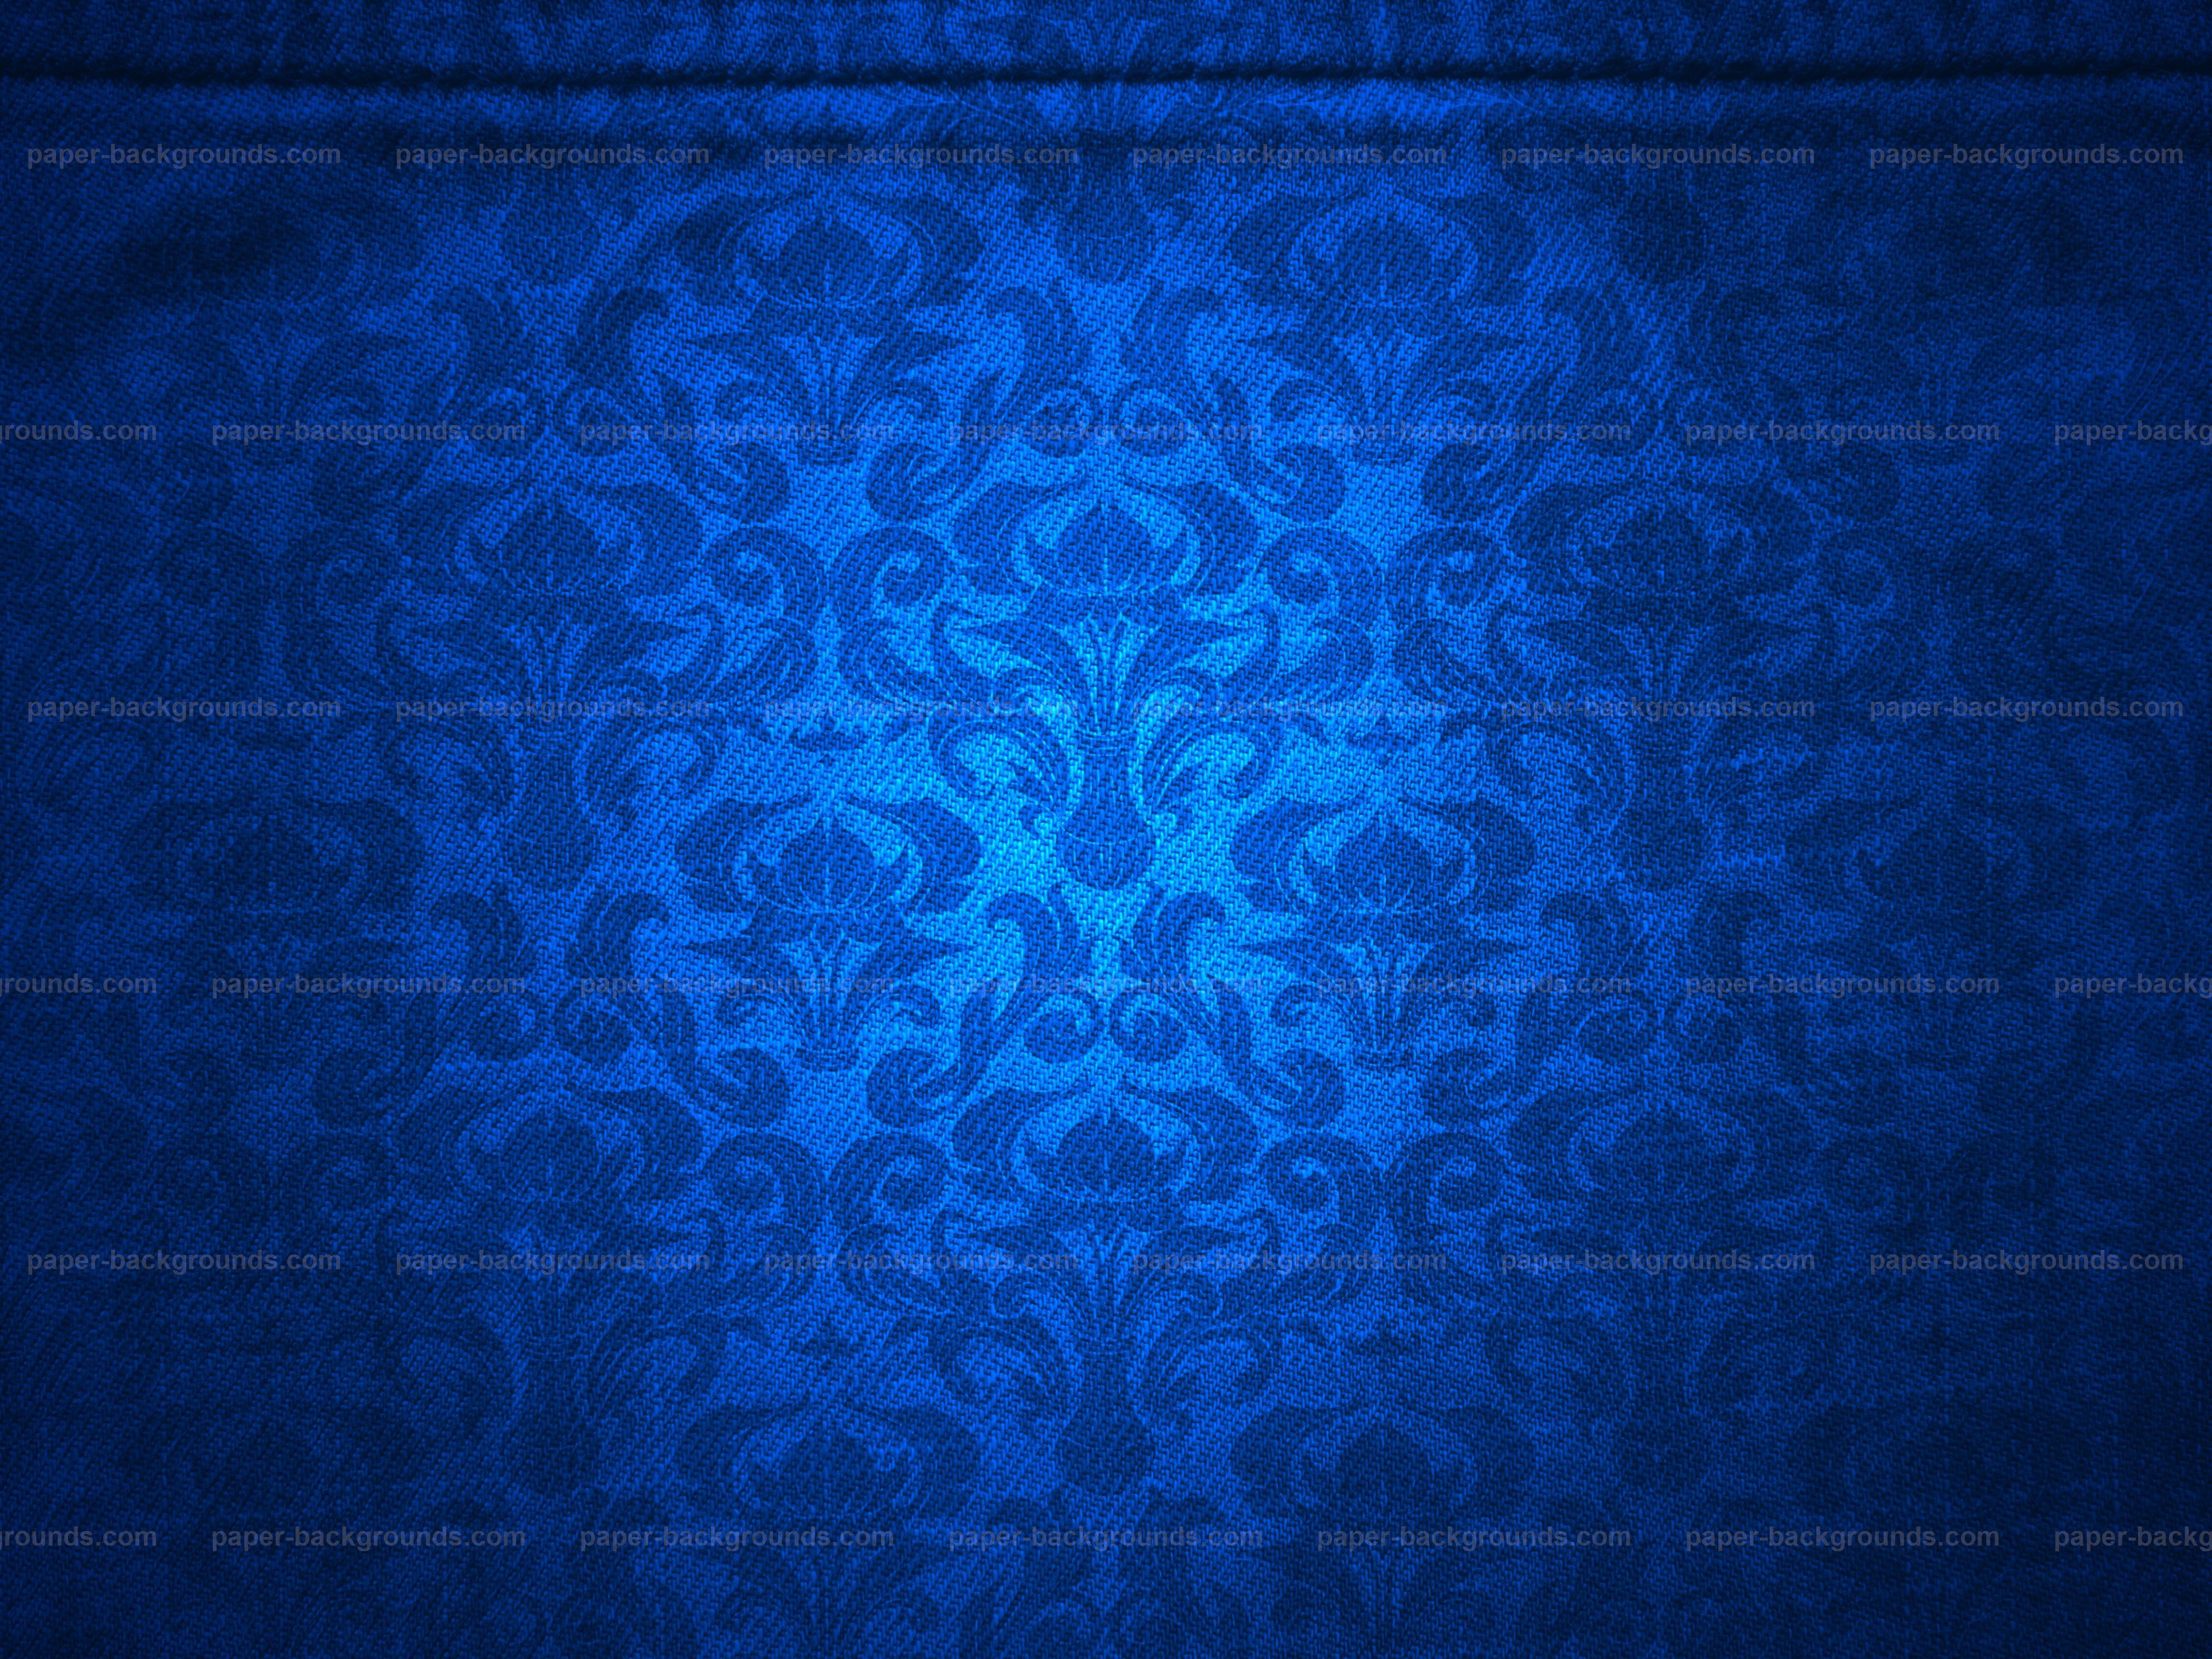 Paper Background. Blue Canvas with Damask Pattern Background